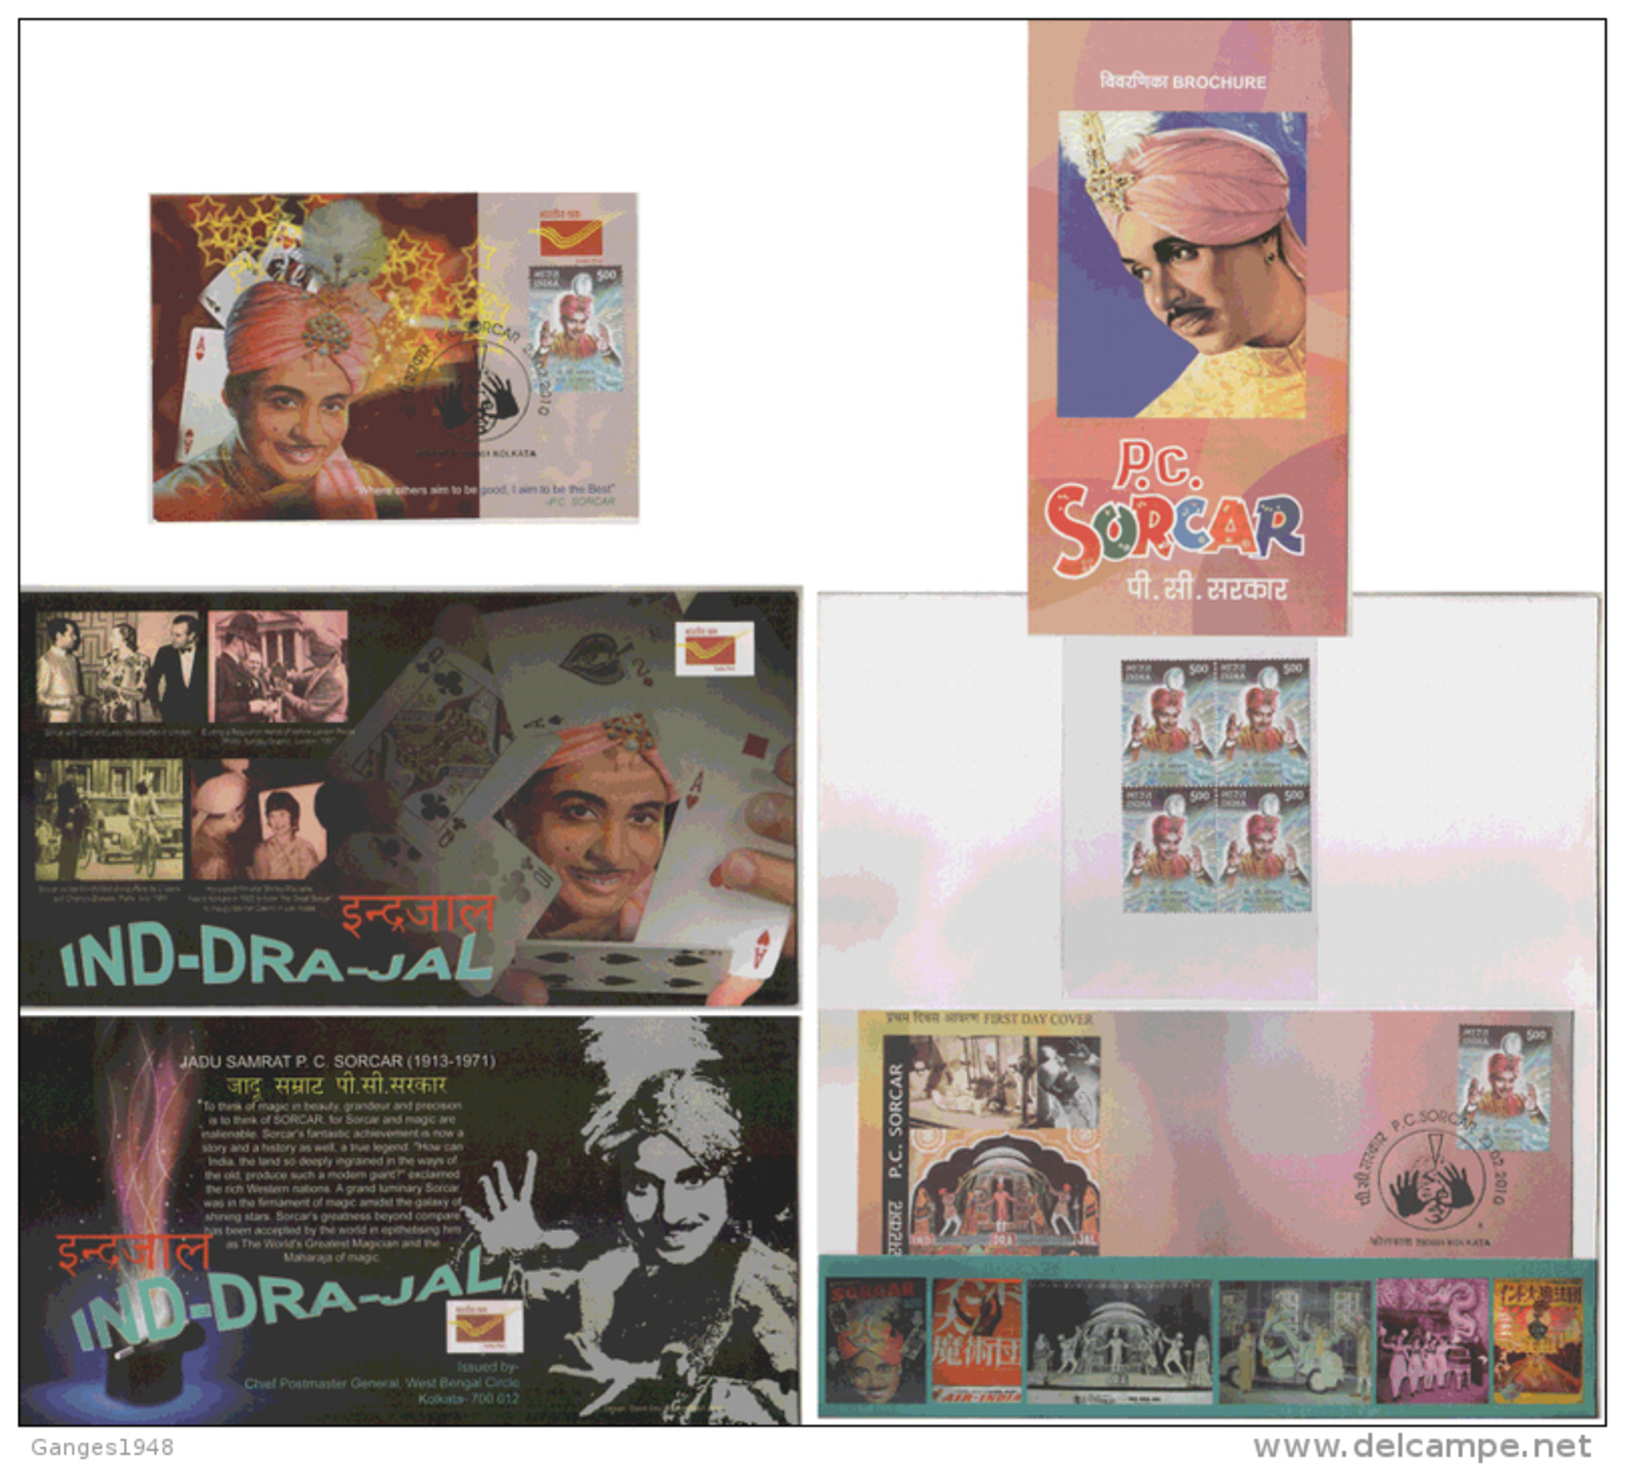 India  2010  P.C. Sorcar  Magician  Playing Cards Tricks  Max Card + FDC + Block Of 4 P&T Presentation Pack  Inde In - FDC